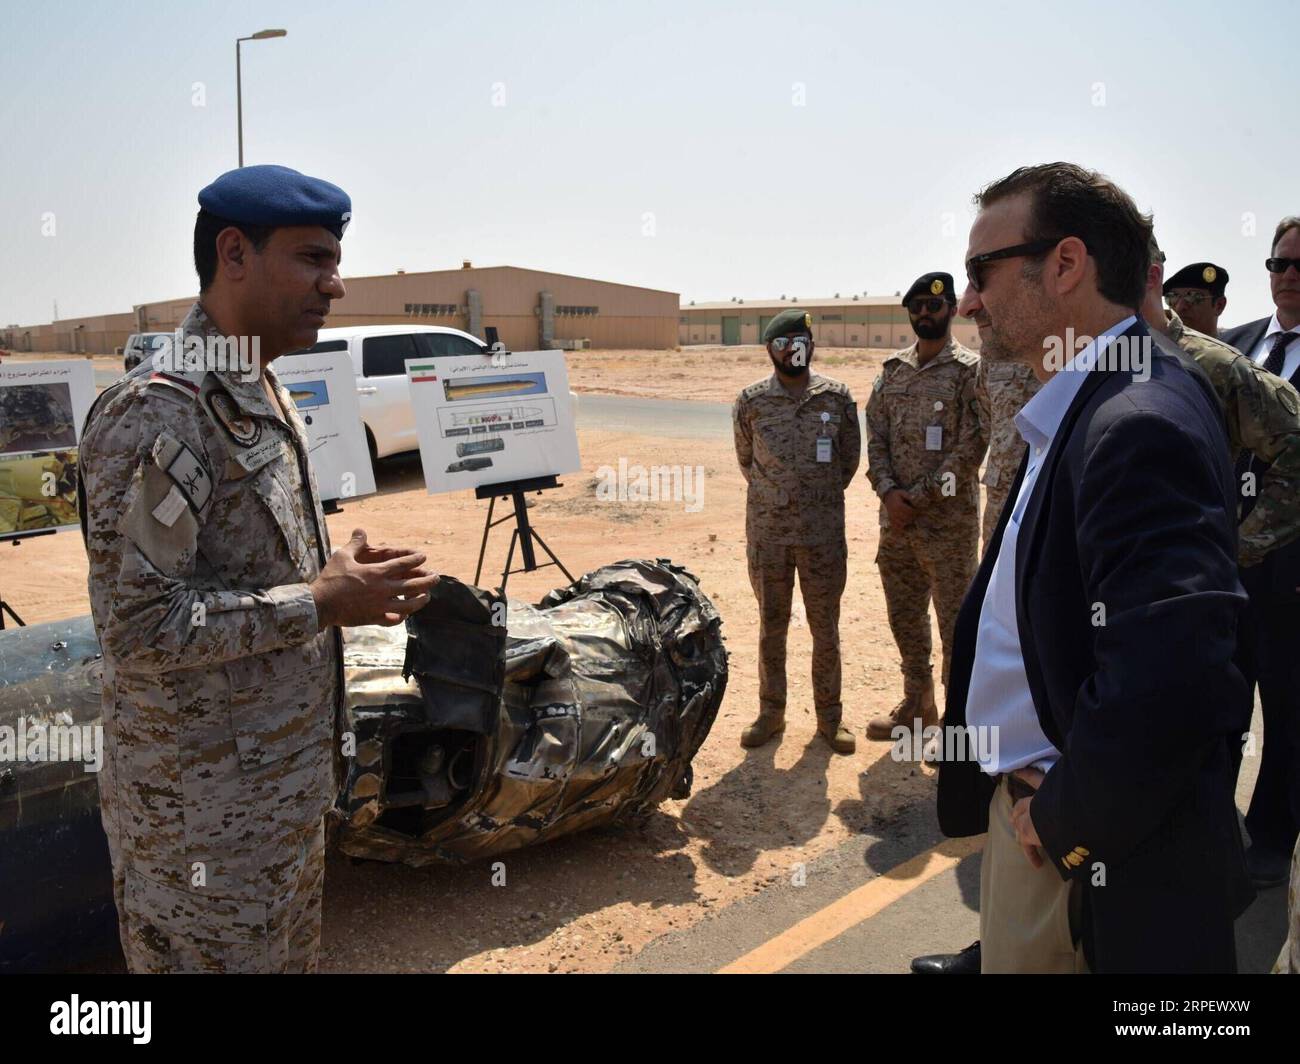 (190905) -- RIYADH, Sept. 5, 2019 -- U.S. Assistant Secretary of Near Eastern Affairs David Schenker (R) visits a military facility in Al Kharj, south of Riyadh, Saudi Arabia, on Sept. 5, 2019. David Schenker said on Thursday that the United States is in talks with Yemen s Houthi rebels in a bid to end the country s civil war. ) SAUDI ARABIA-RIYADH-U.S.-DAVID SCHENKER-VISIT TuxYifan PUBLICATIONxNOTxINxCHN Stock Photo